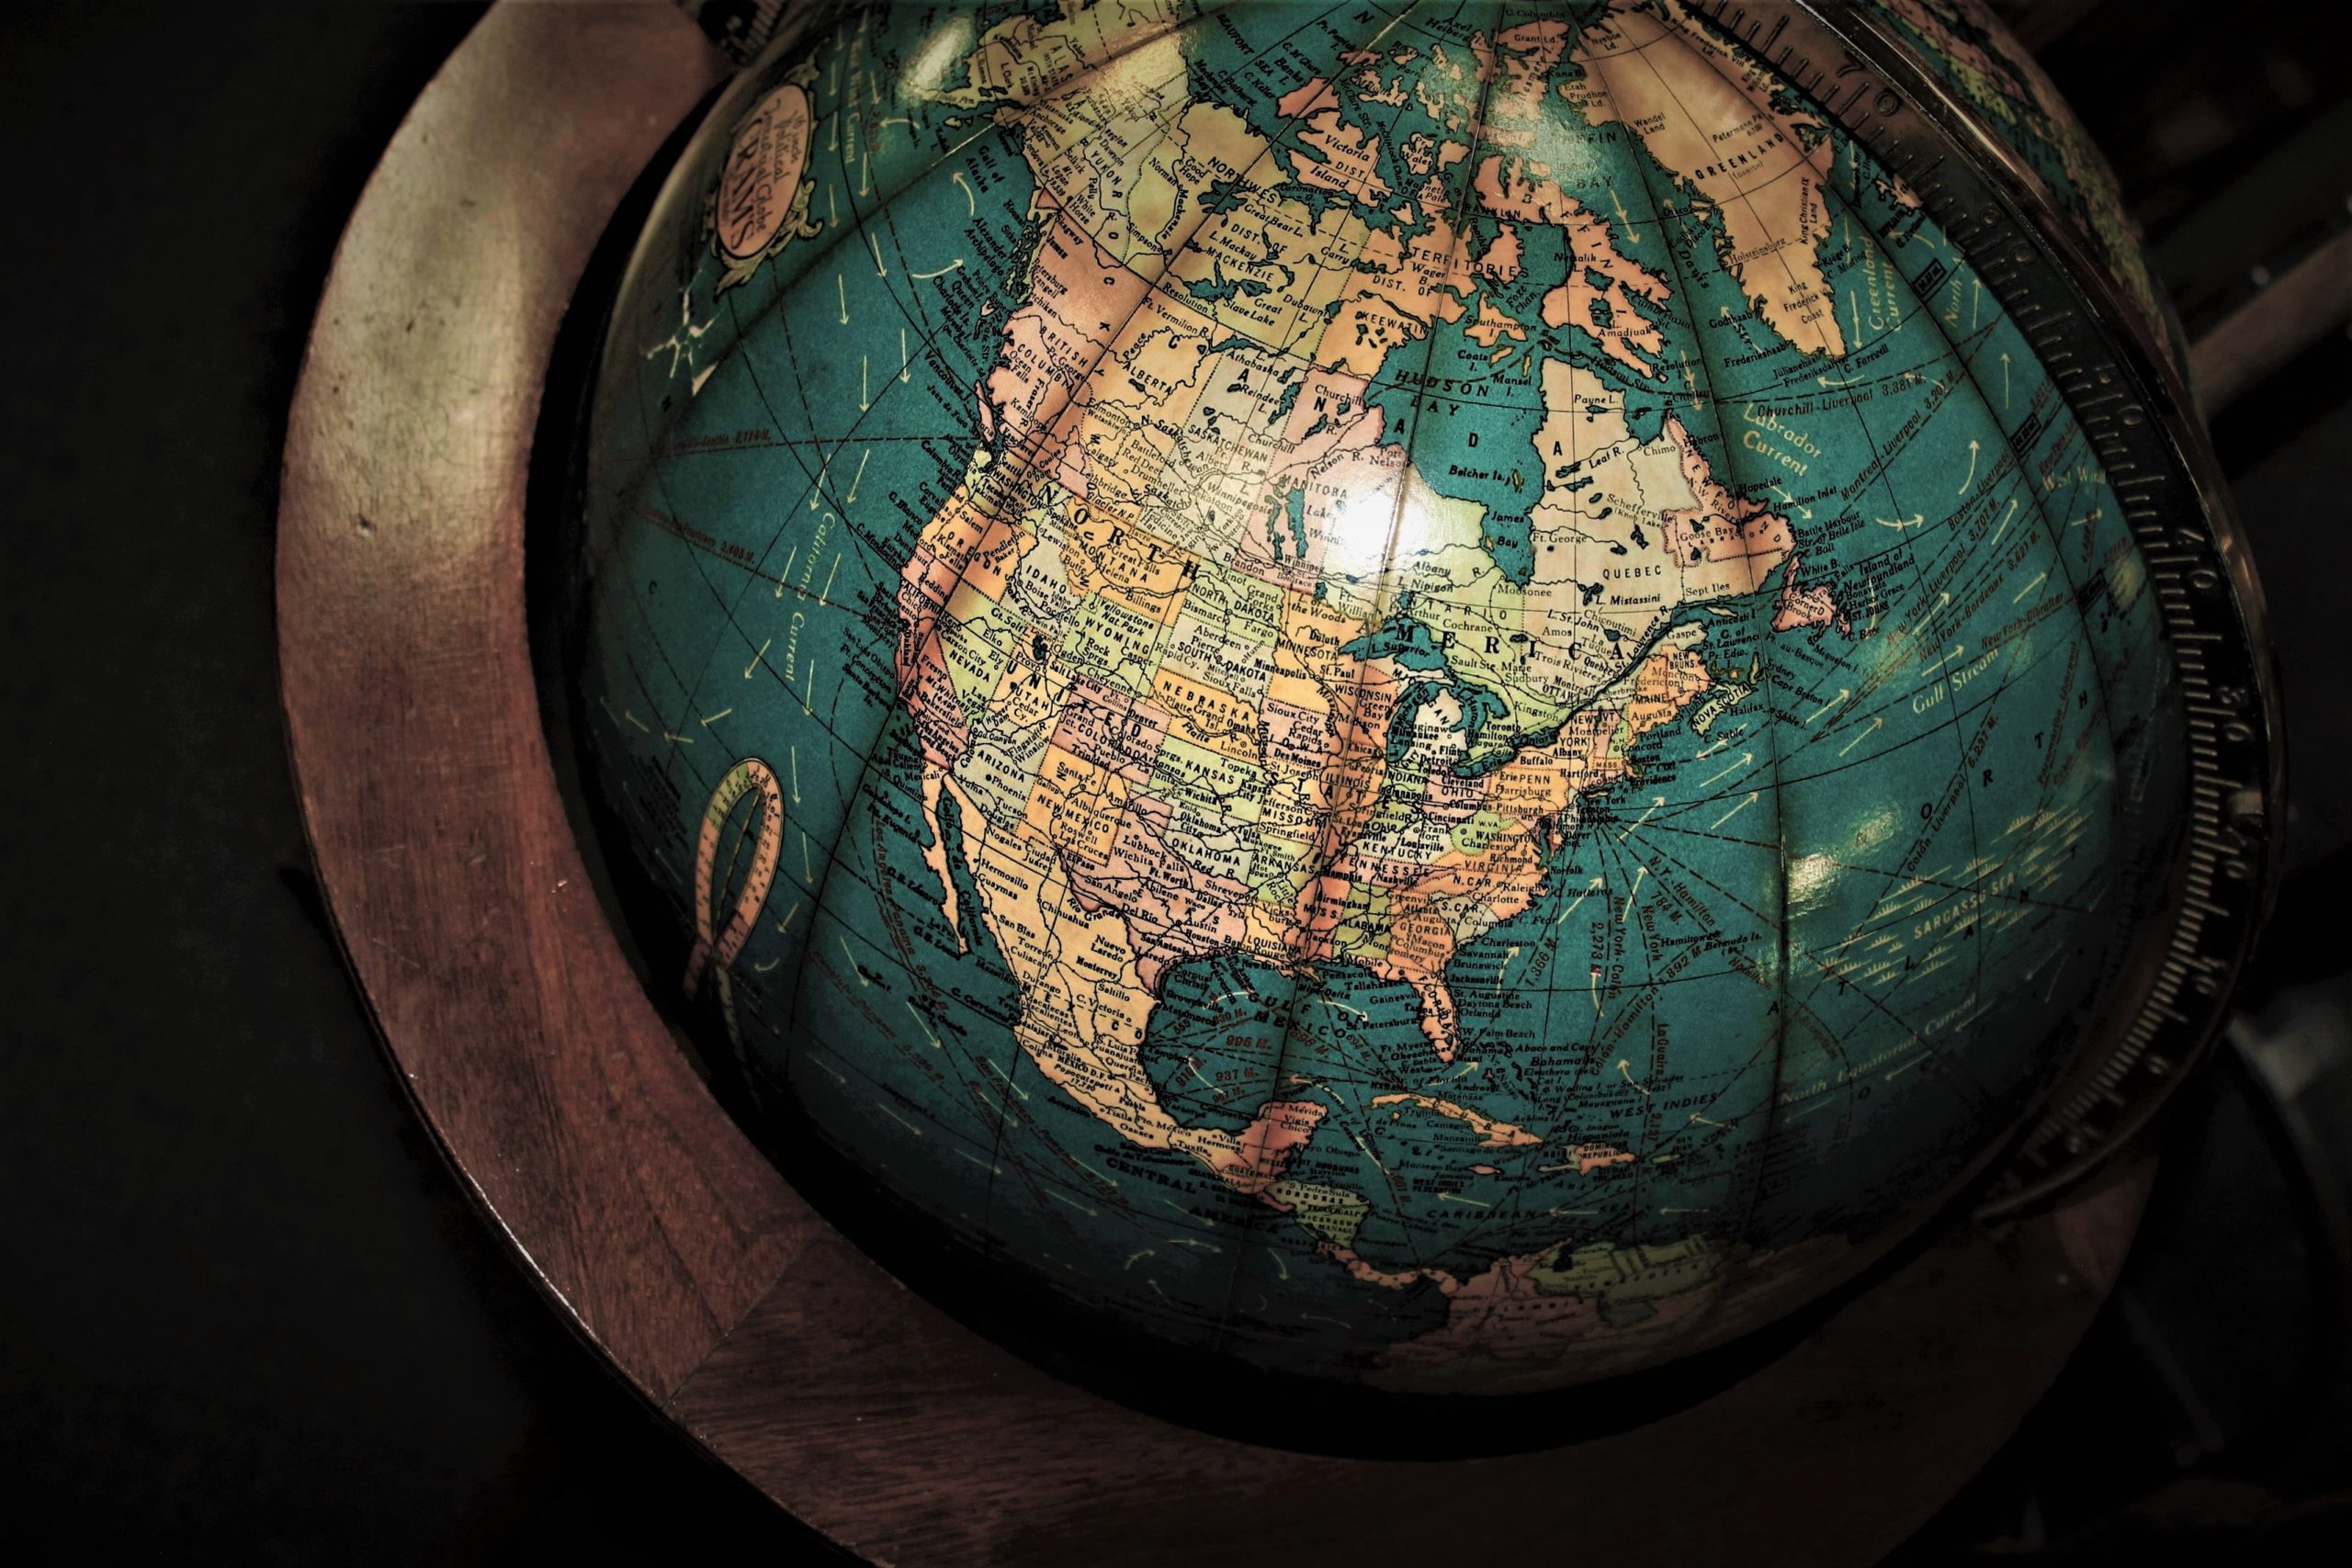 A globe showing a map of North America